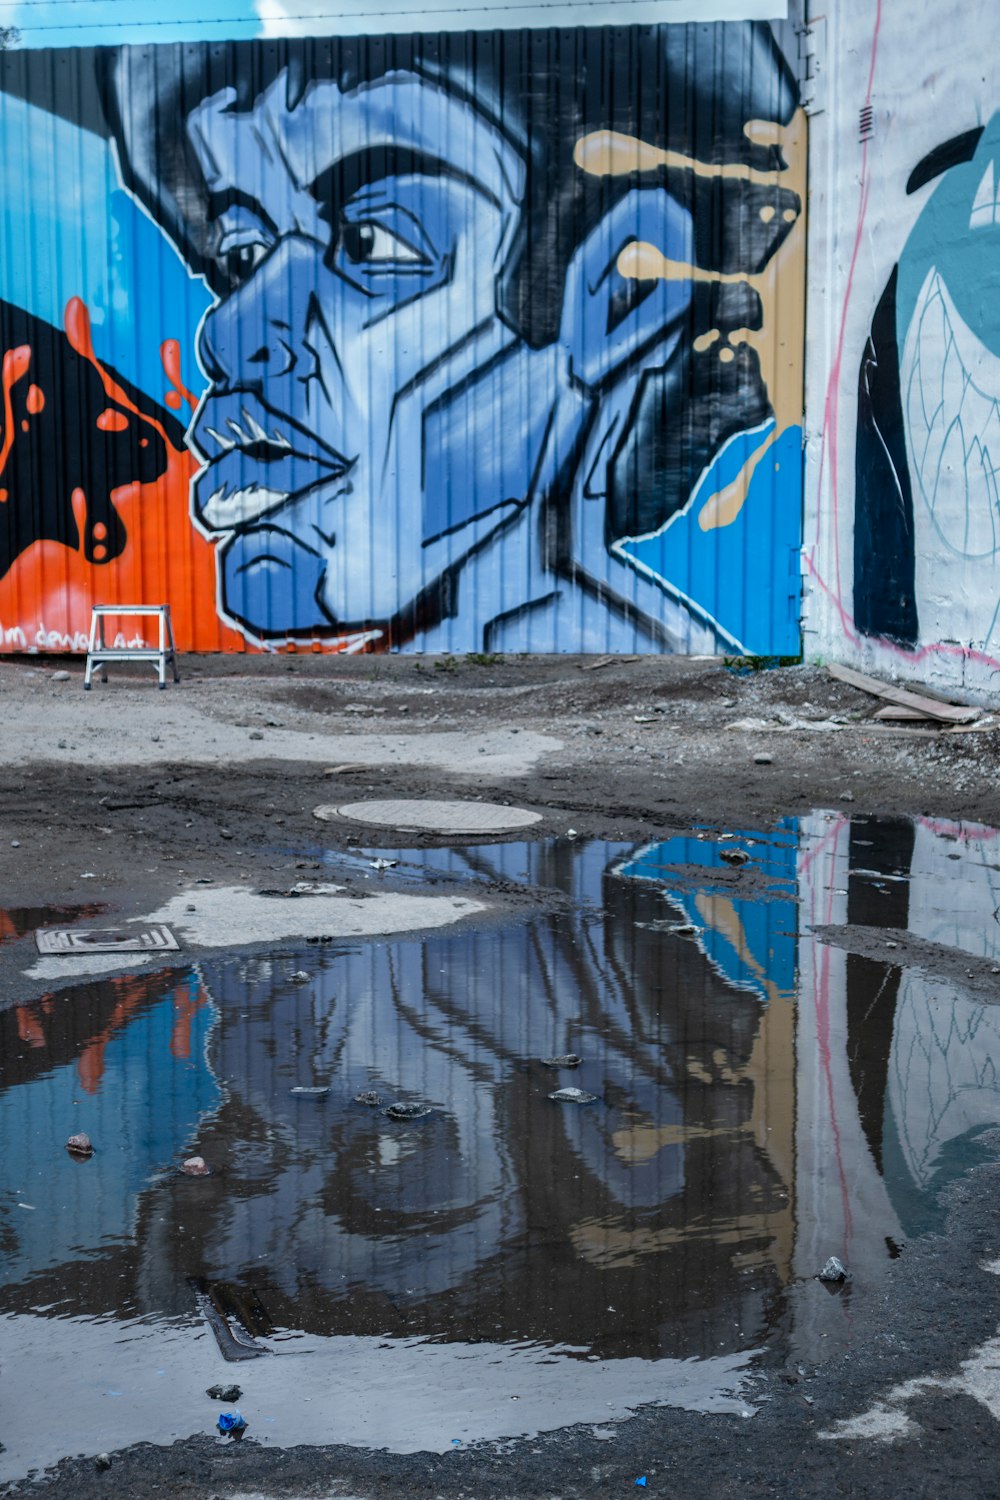 wall graffiti of person's face with blue skin